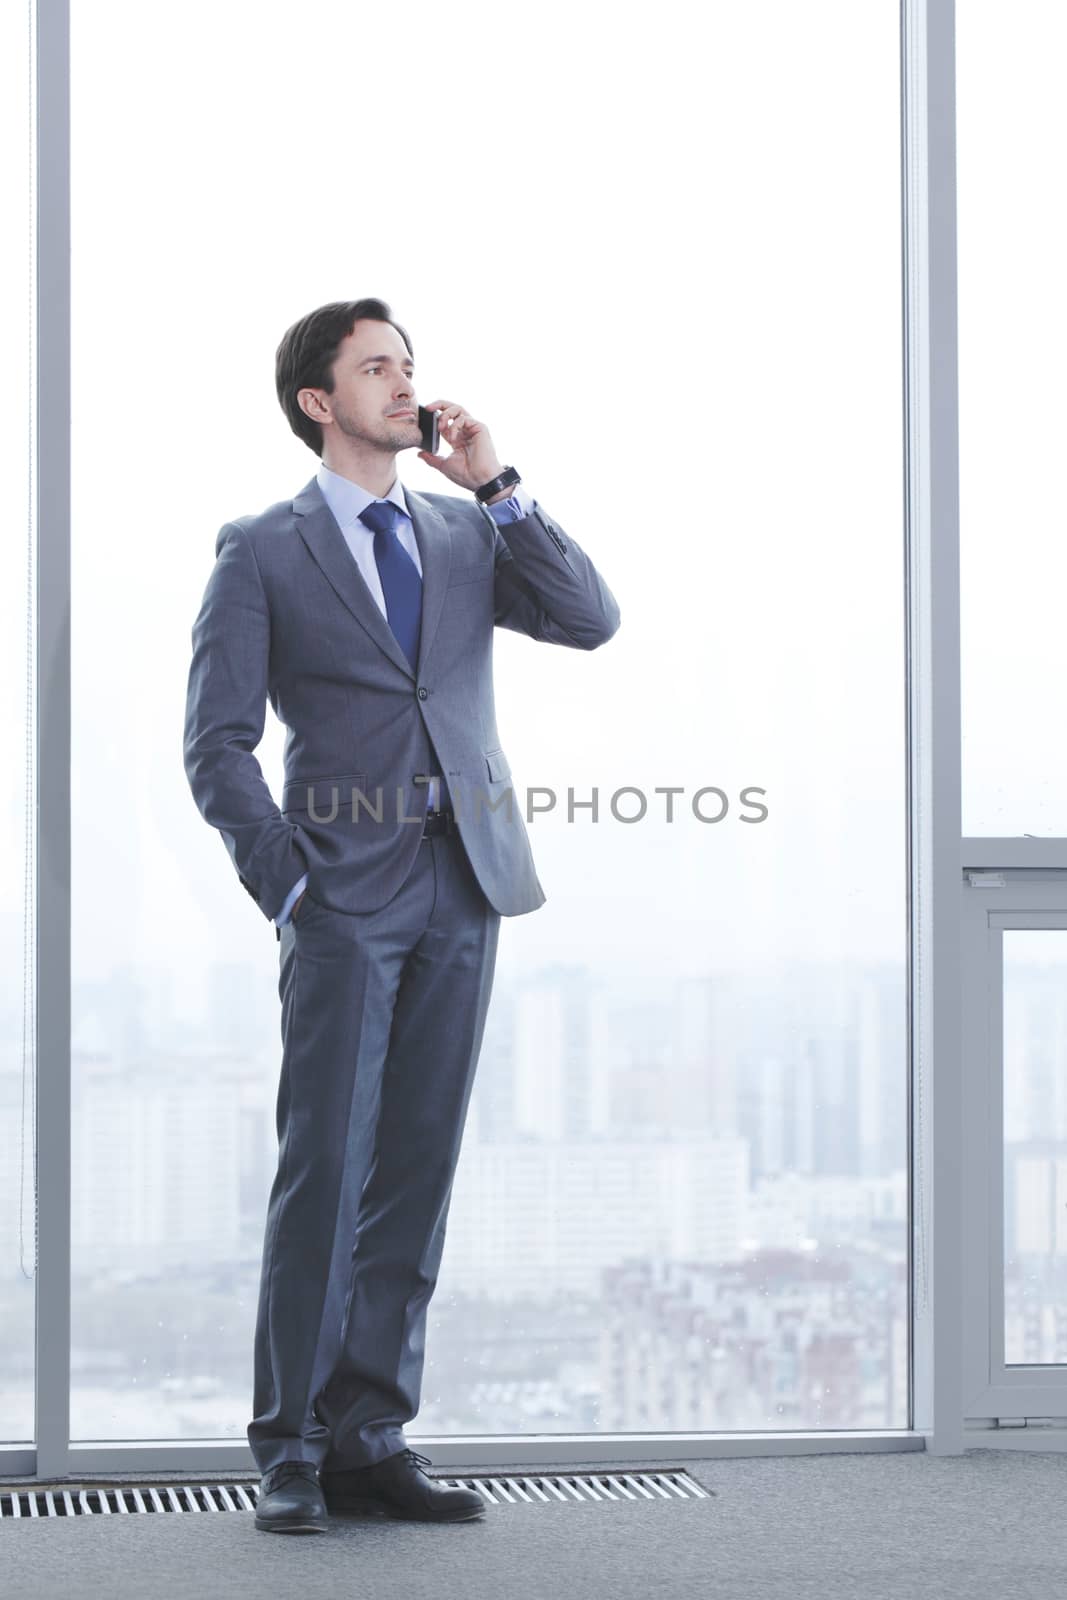 Portrait of a successful man, having a business conversation, at work station by the window